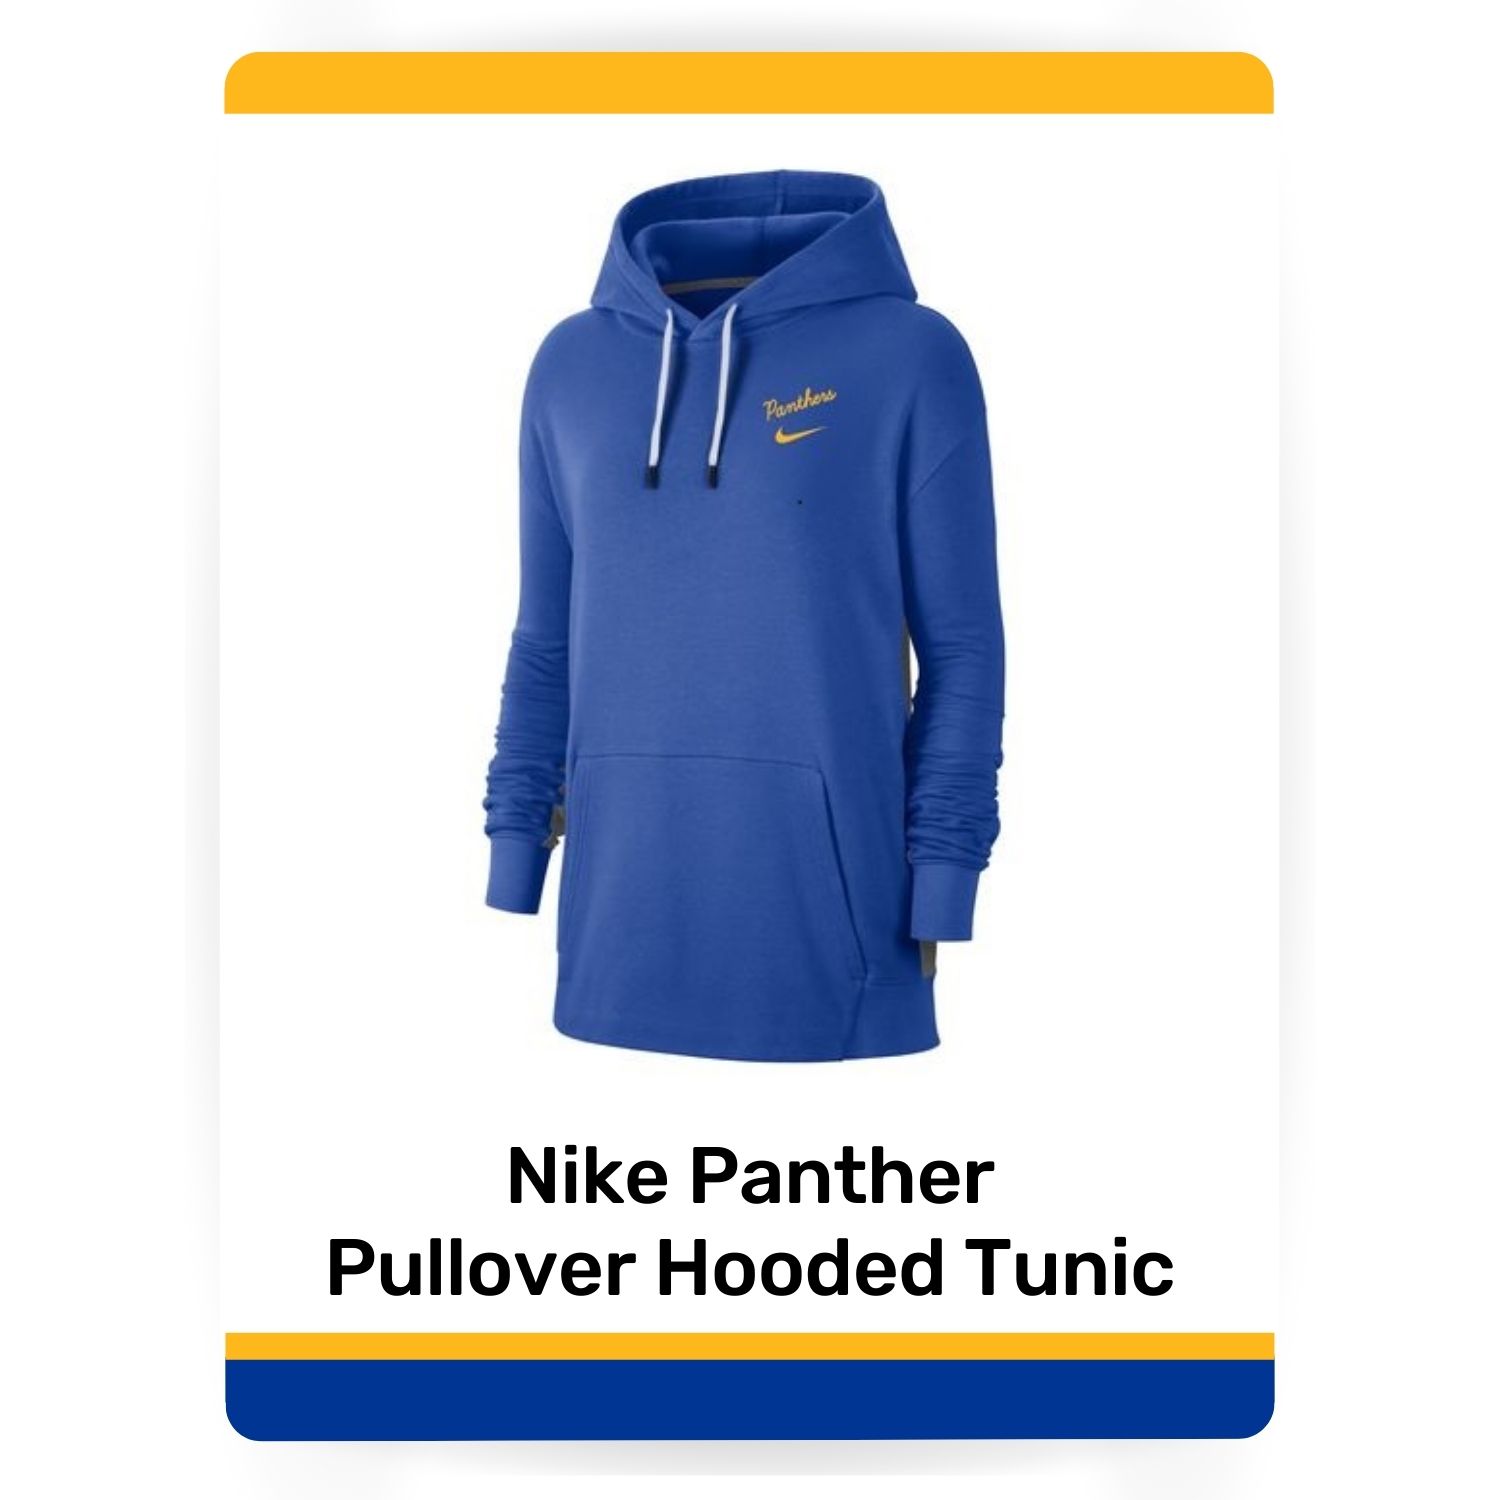 Nike Panther Pullover Hooded Tunic